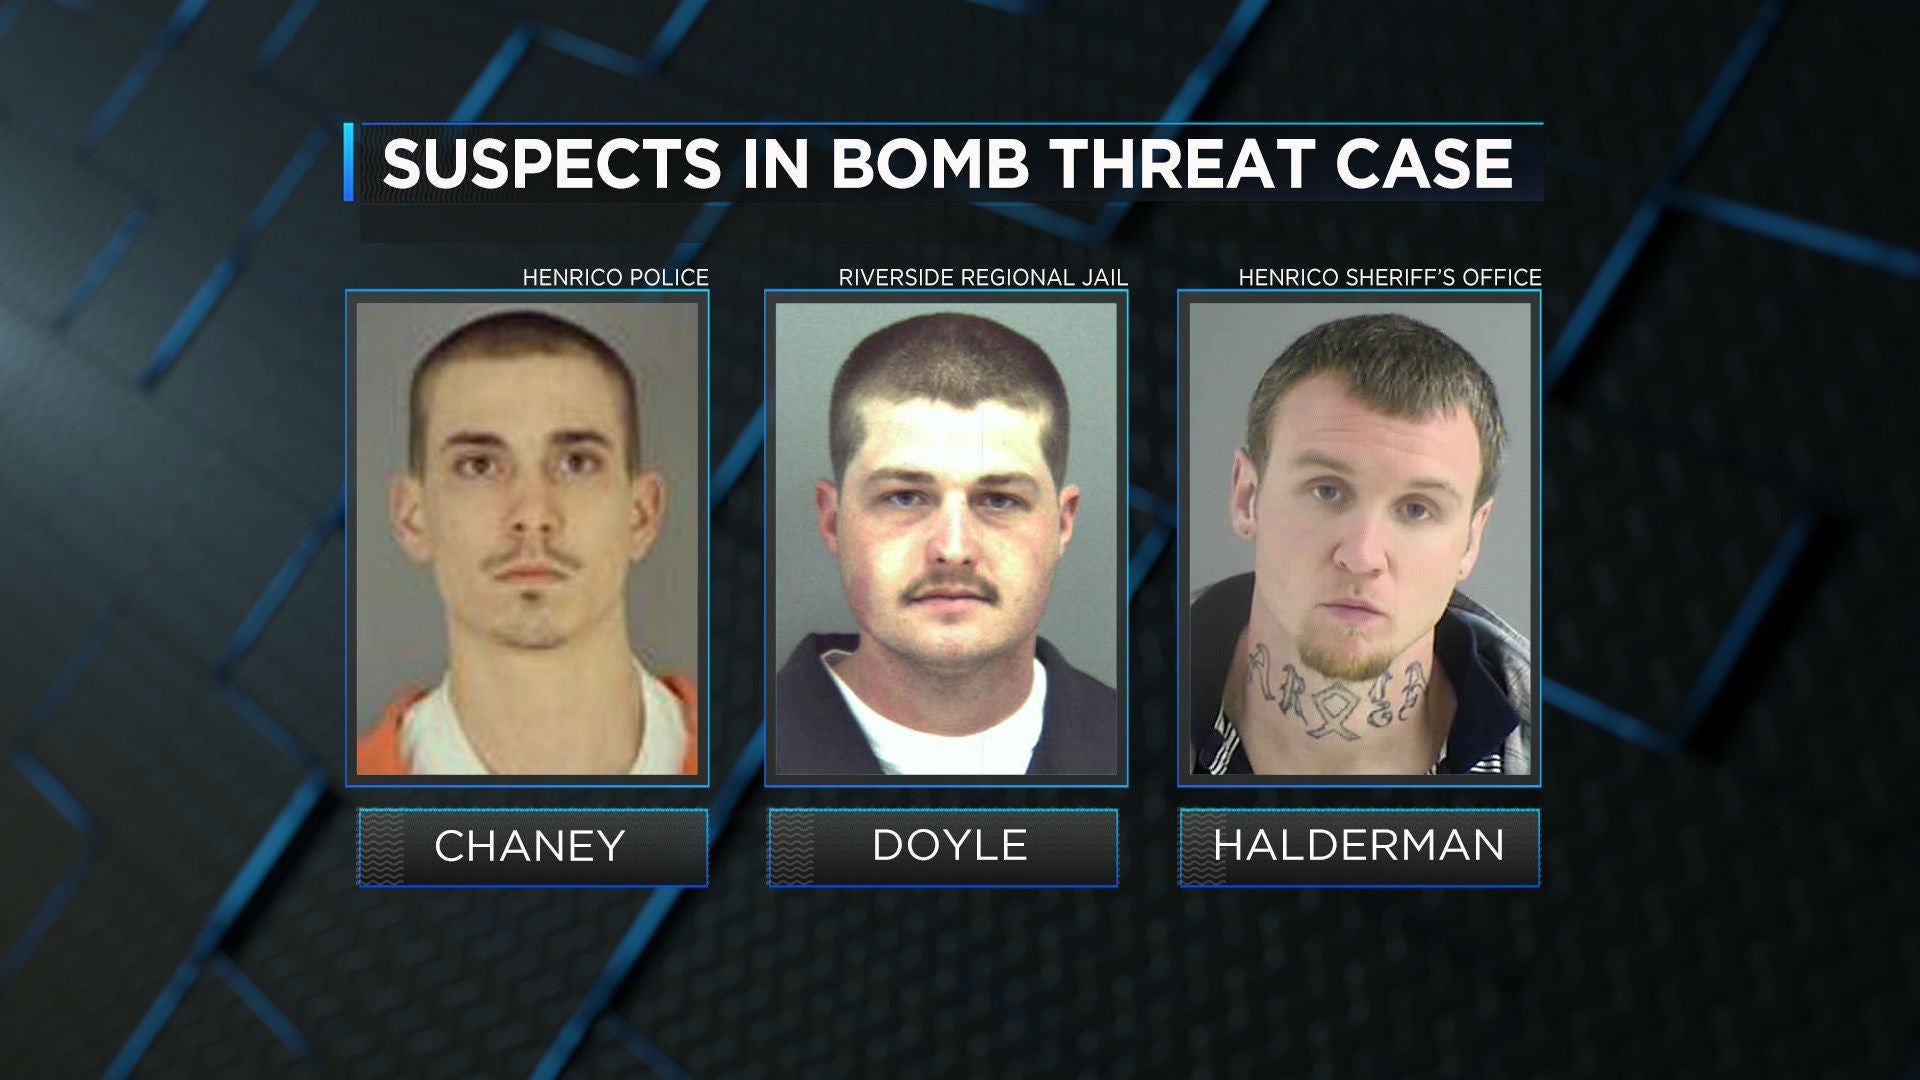 Investigators said the three men were arrested after trying to buy weapons from an undercover agent